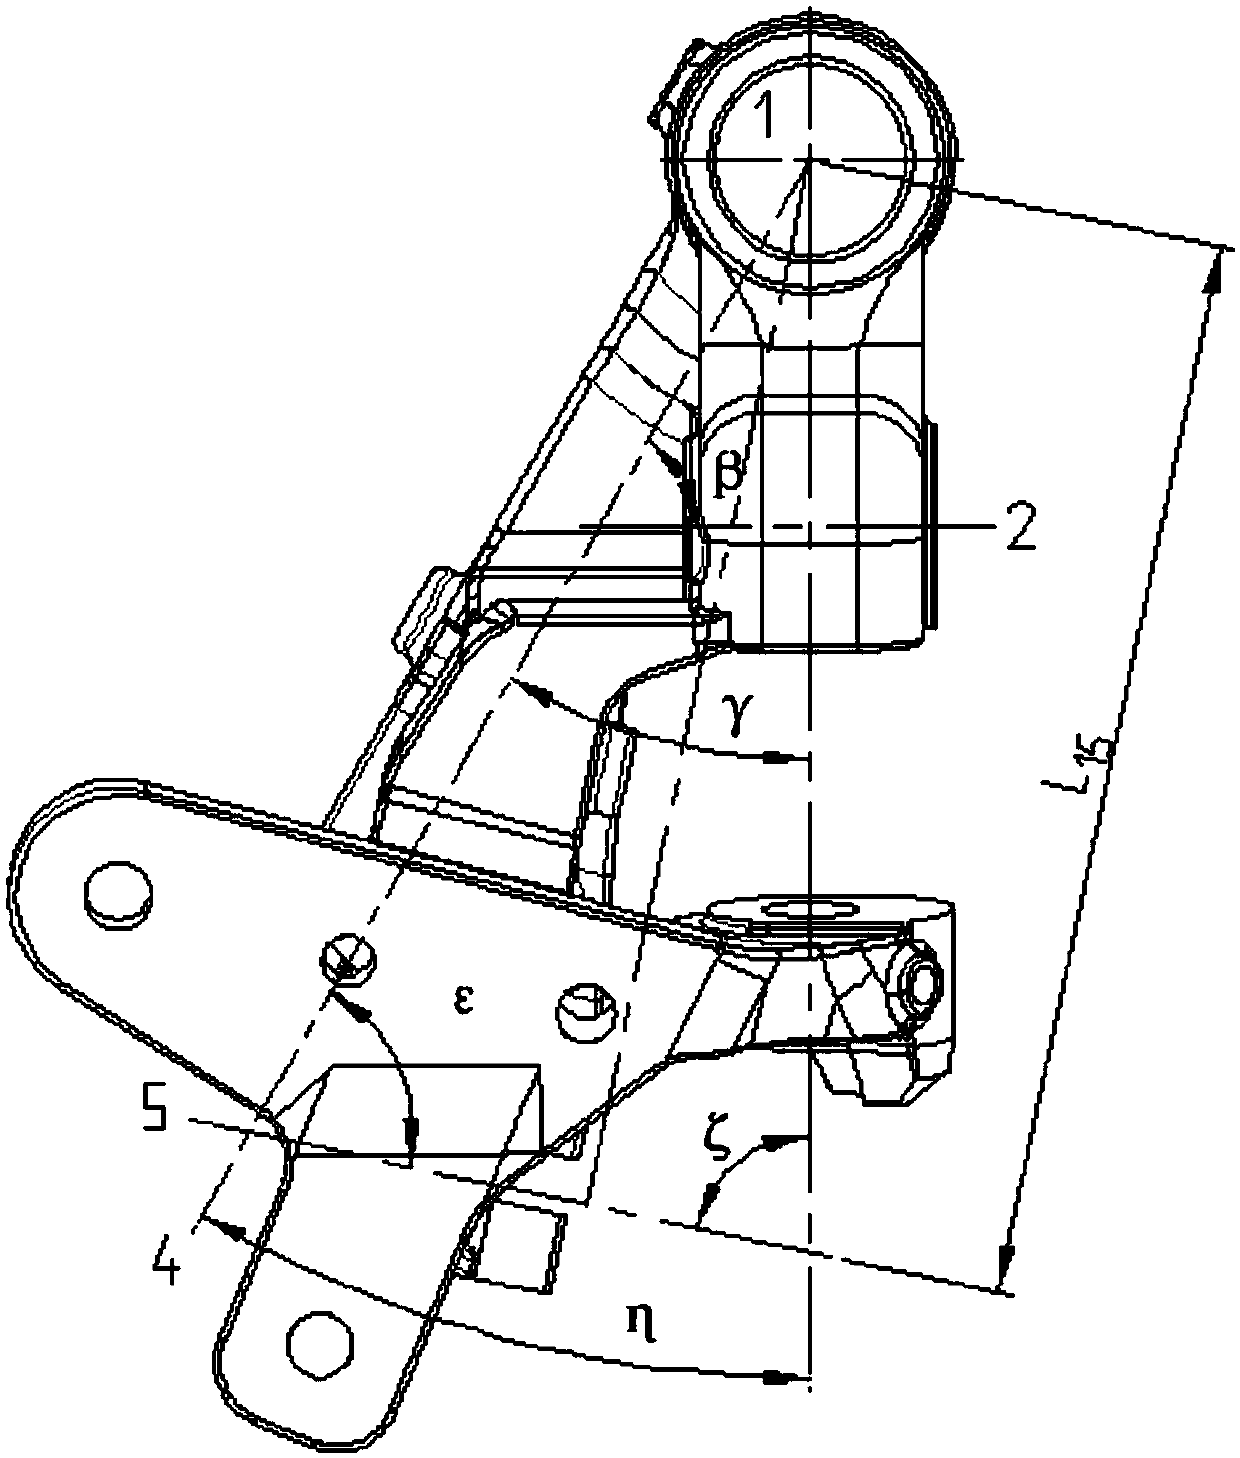 Axle hole processing clamp and method for dual-fluted-disc-driven knotter bracket